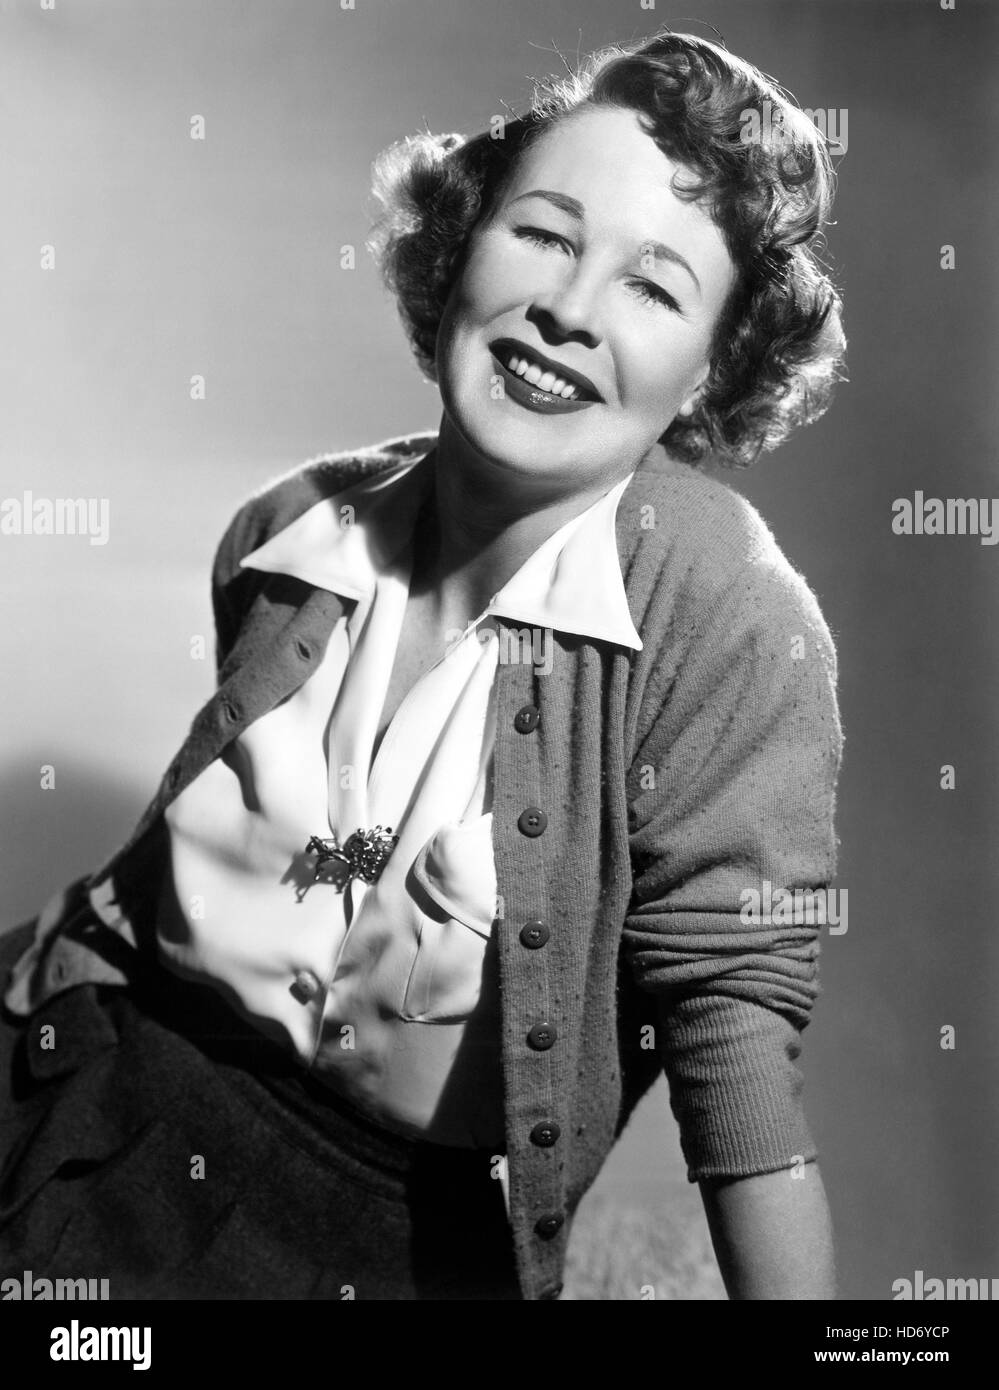 THE WENDY BARRIE SHOW, Wendy Barrie, 1948-1950 Stock Photo - Alamy